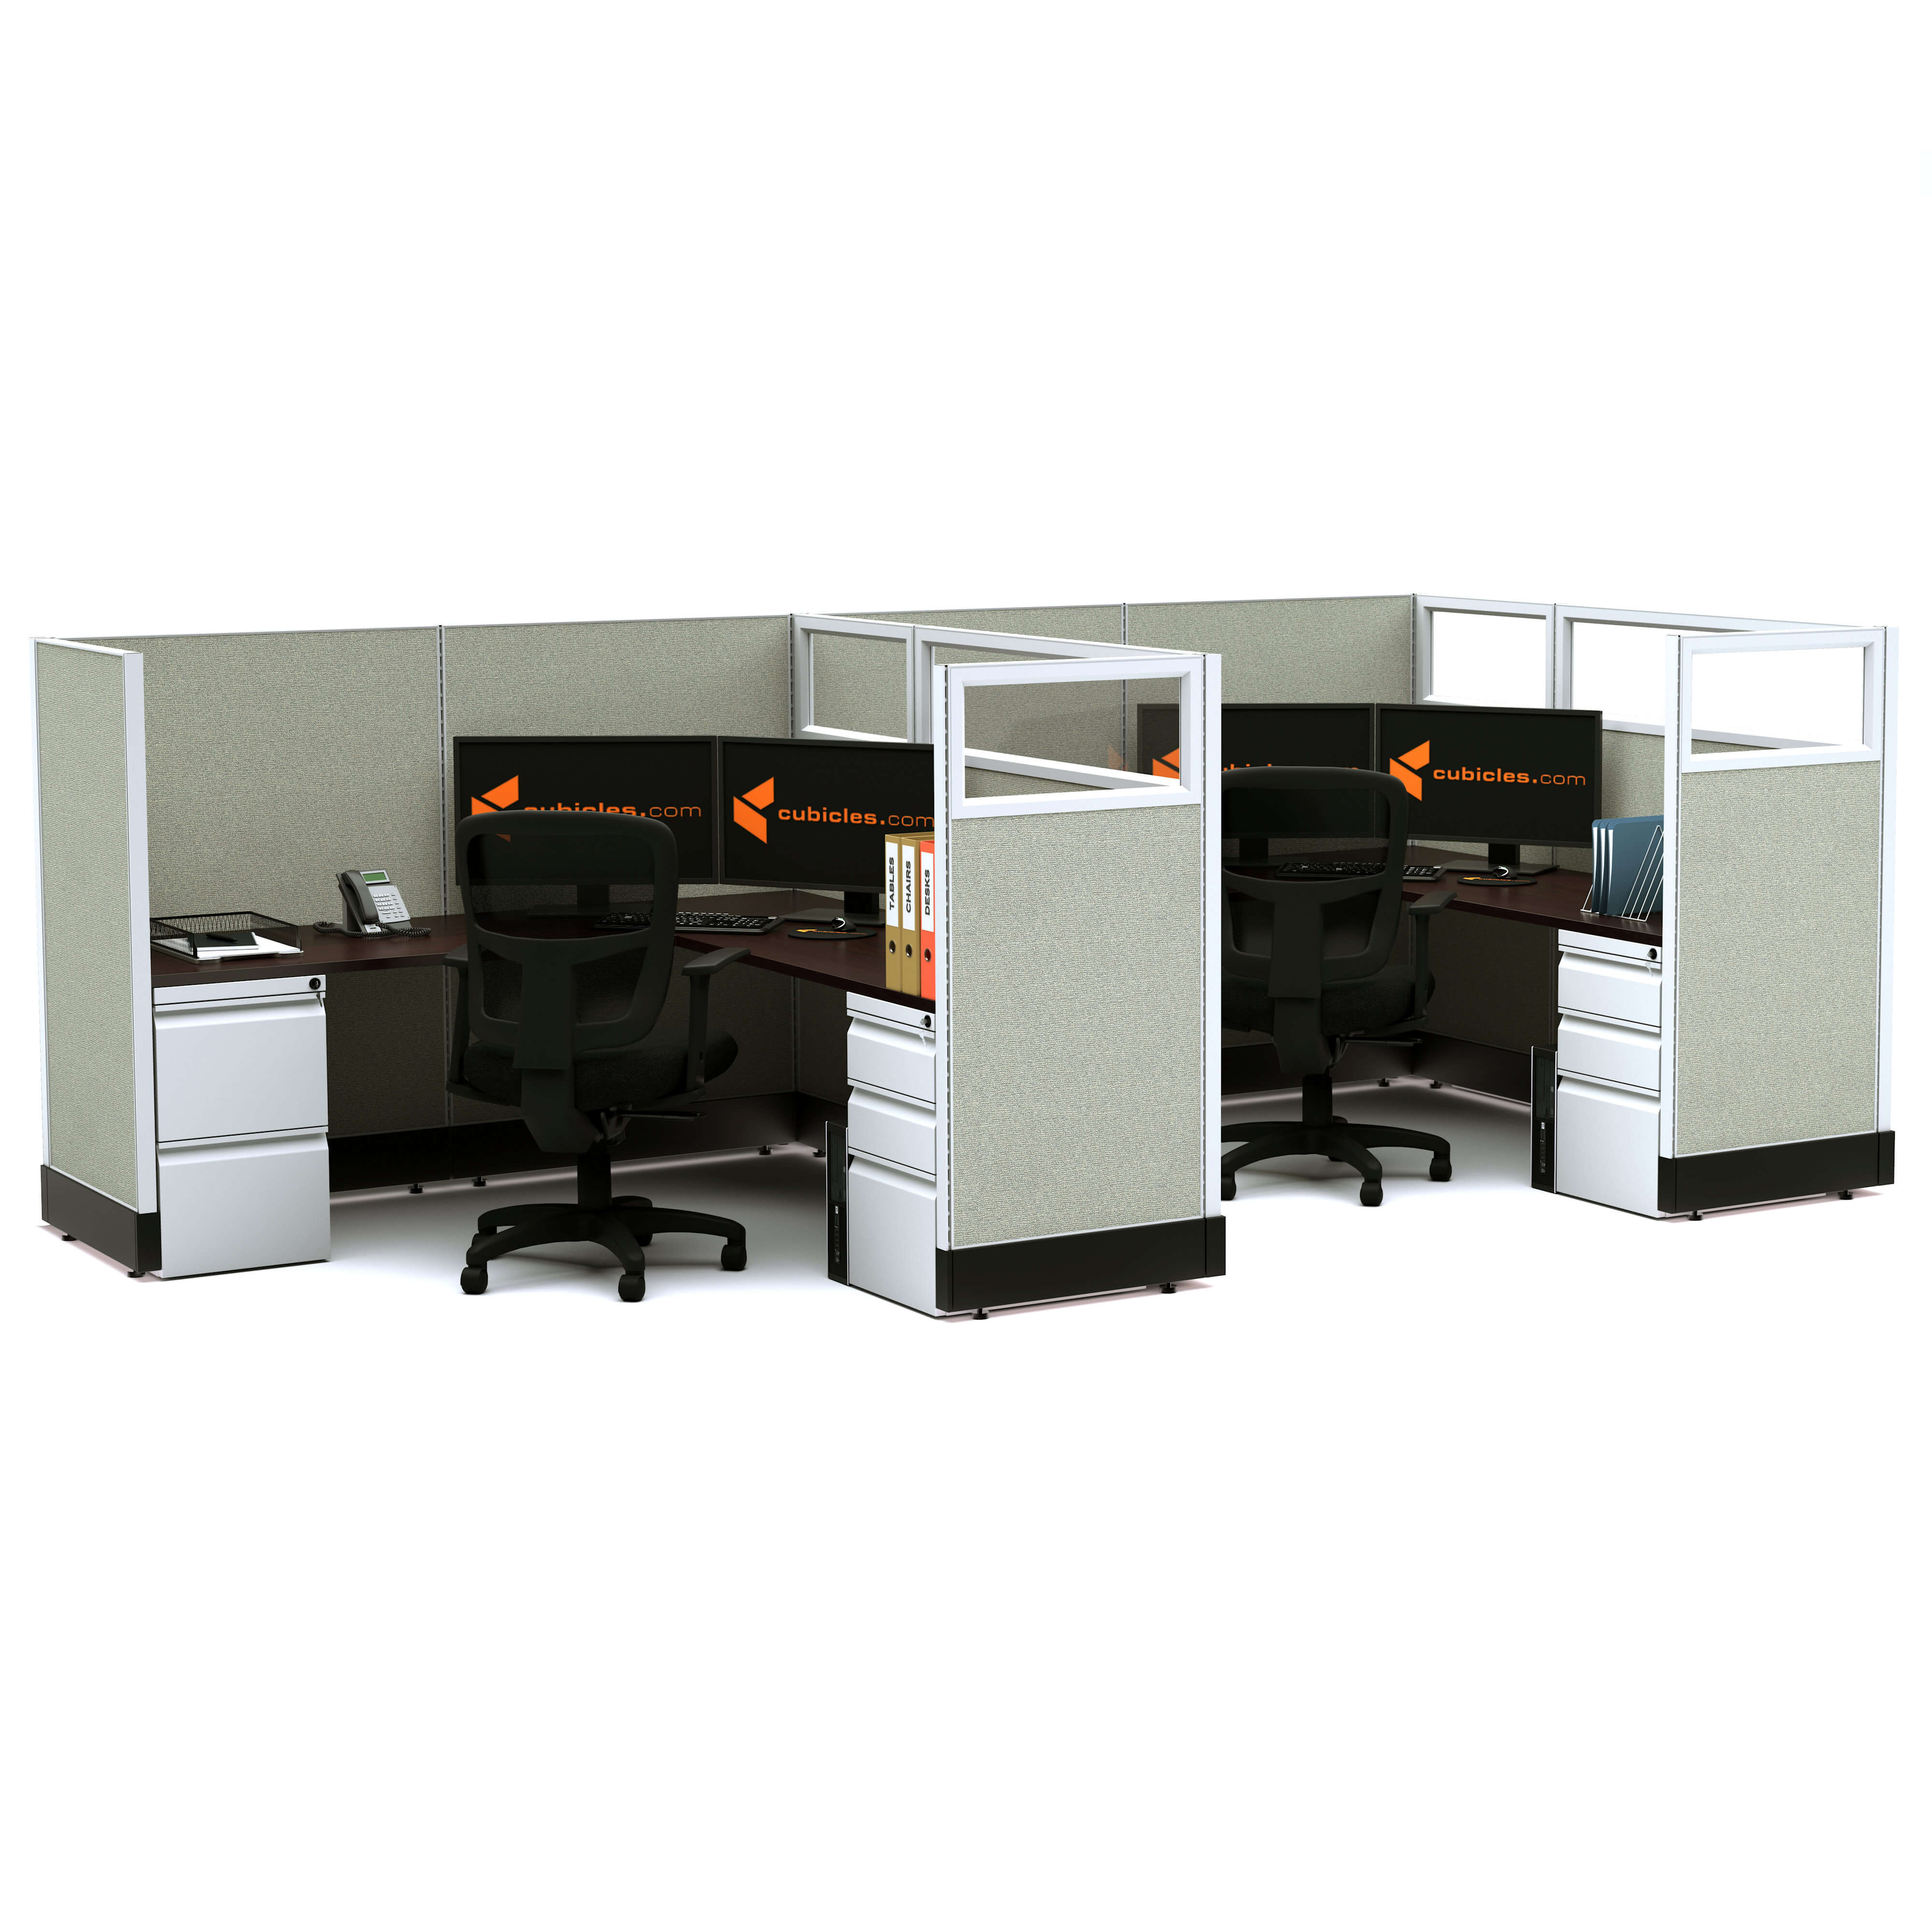 modular-office-furniture-partial-glass-office-cubicles-53h-2pack-inline-non-powered.jpg